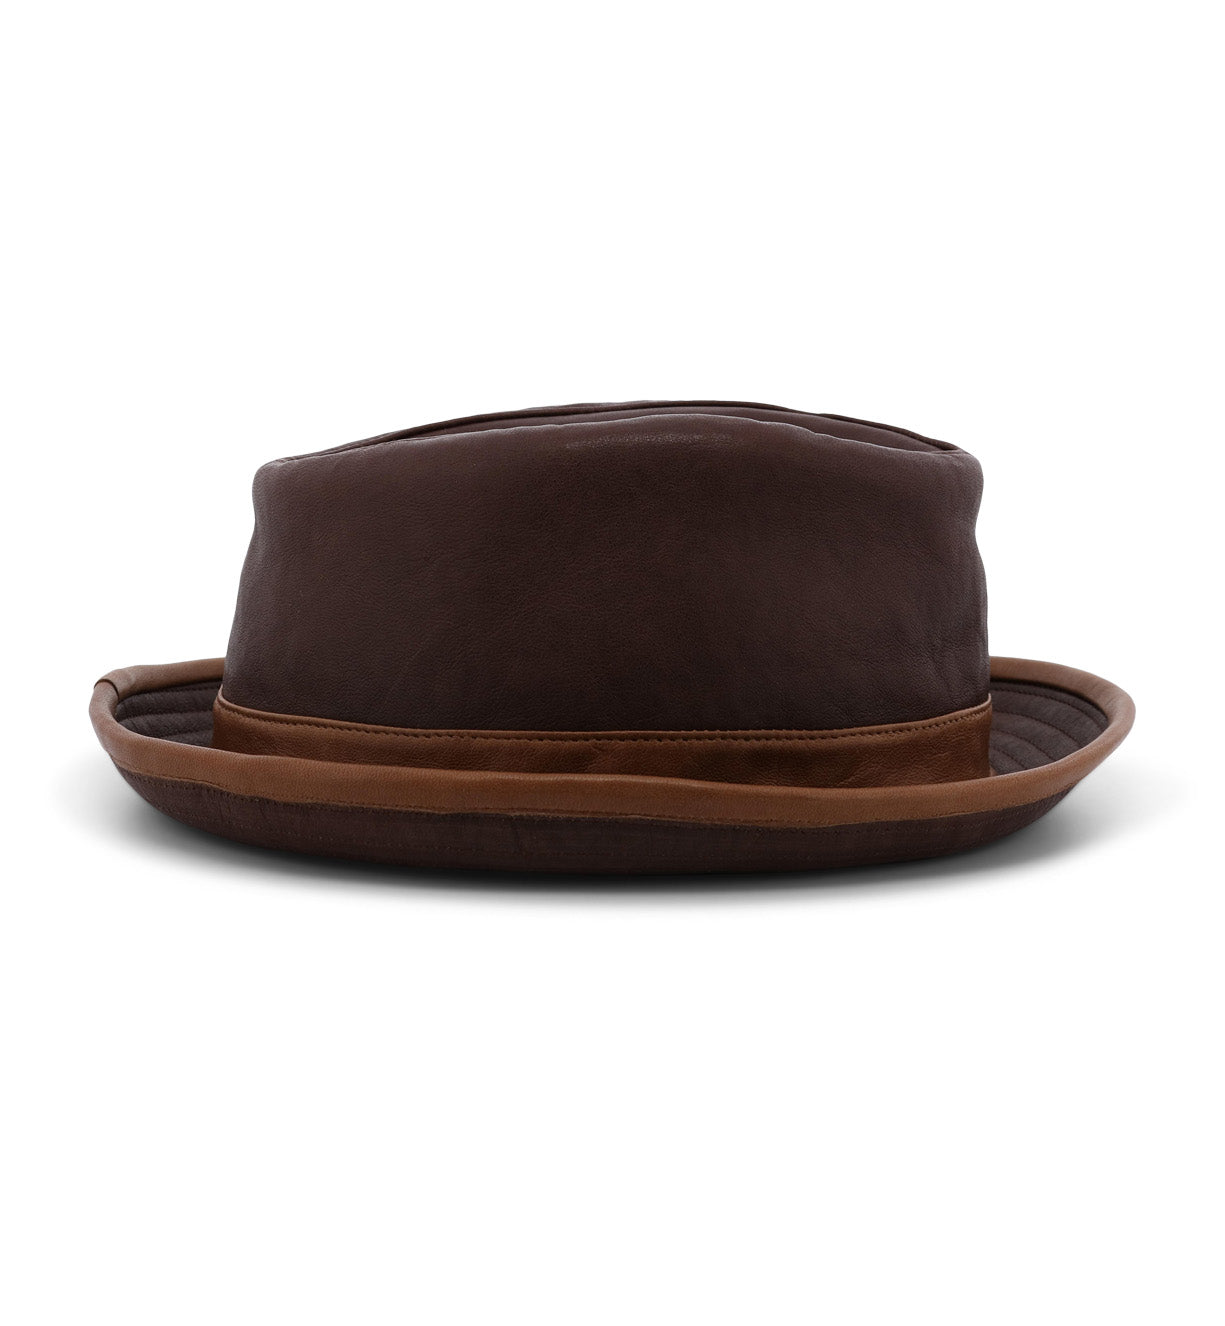 A Turino fedora by Bed Stu on a white background.